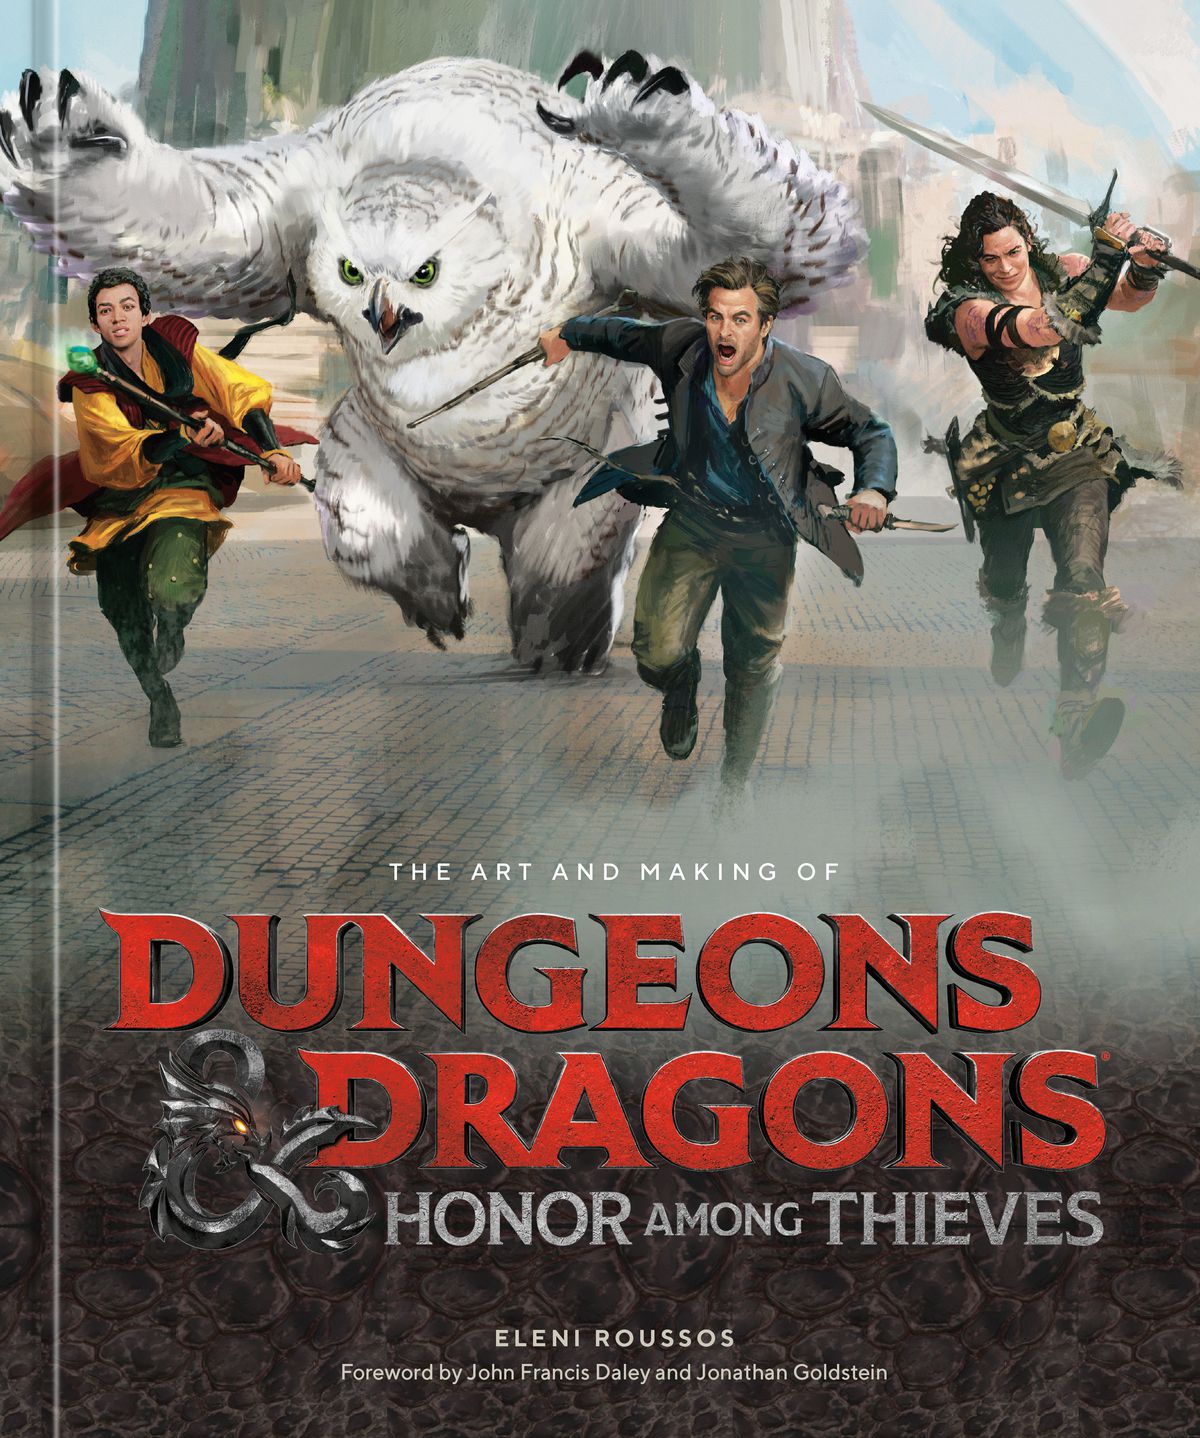 Cover art per The Art and Making of Dungeons and Dragons: Honor Among Thieves, con un dipinto degli eroi del film che caricano in avanti.